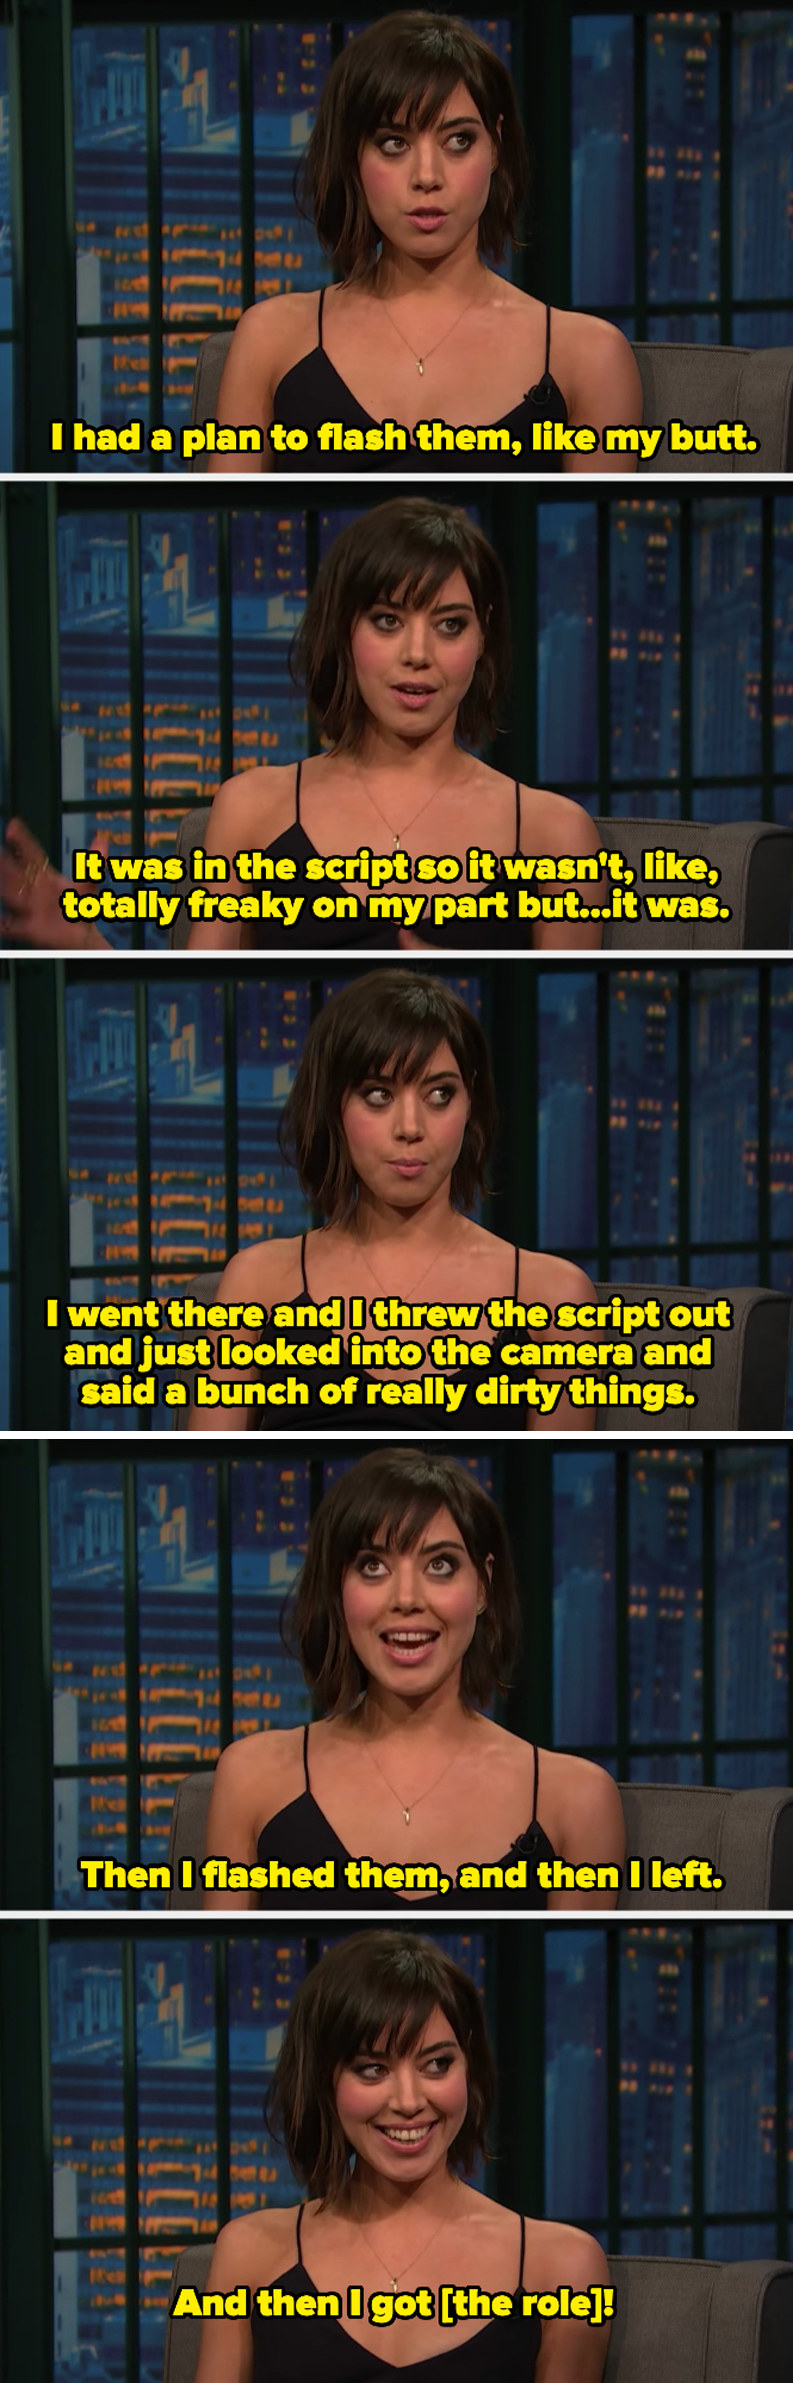 Aubrey explaining her plan was to flash her butt and she threw the script out, looked in the camera, said a bunch of dirty things, flashed them, and left. She got the role.